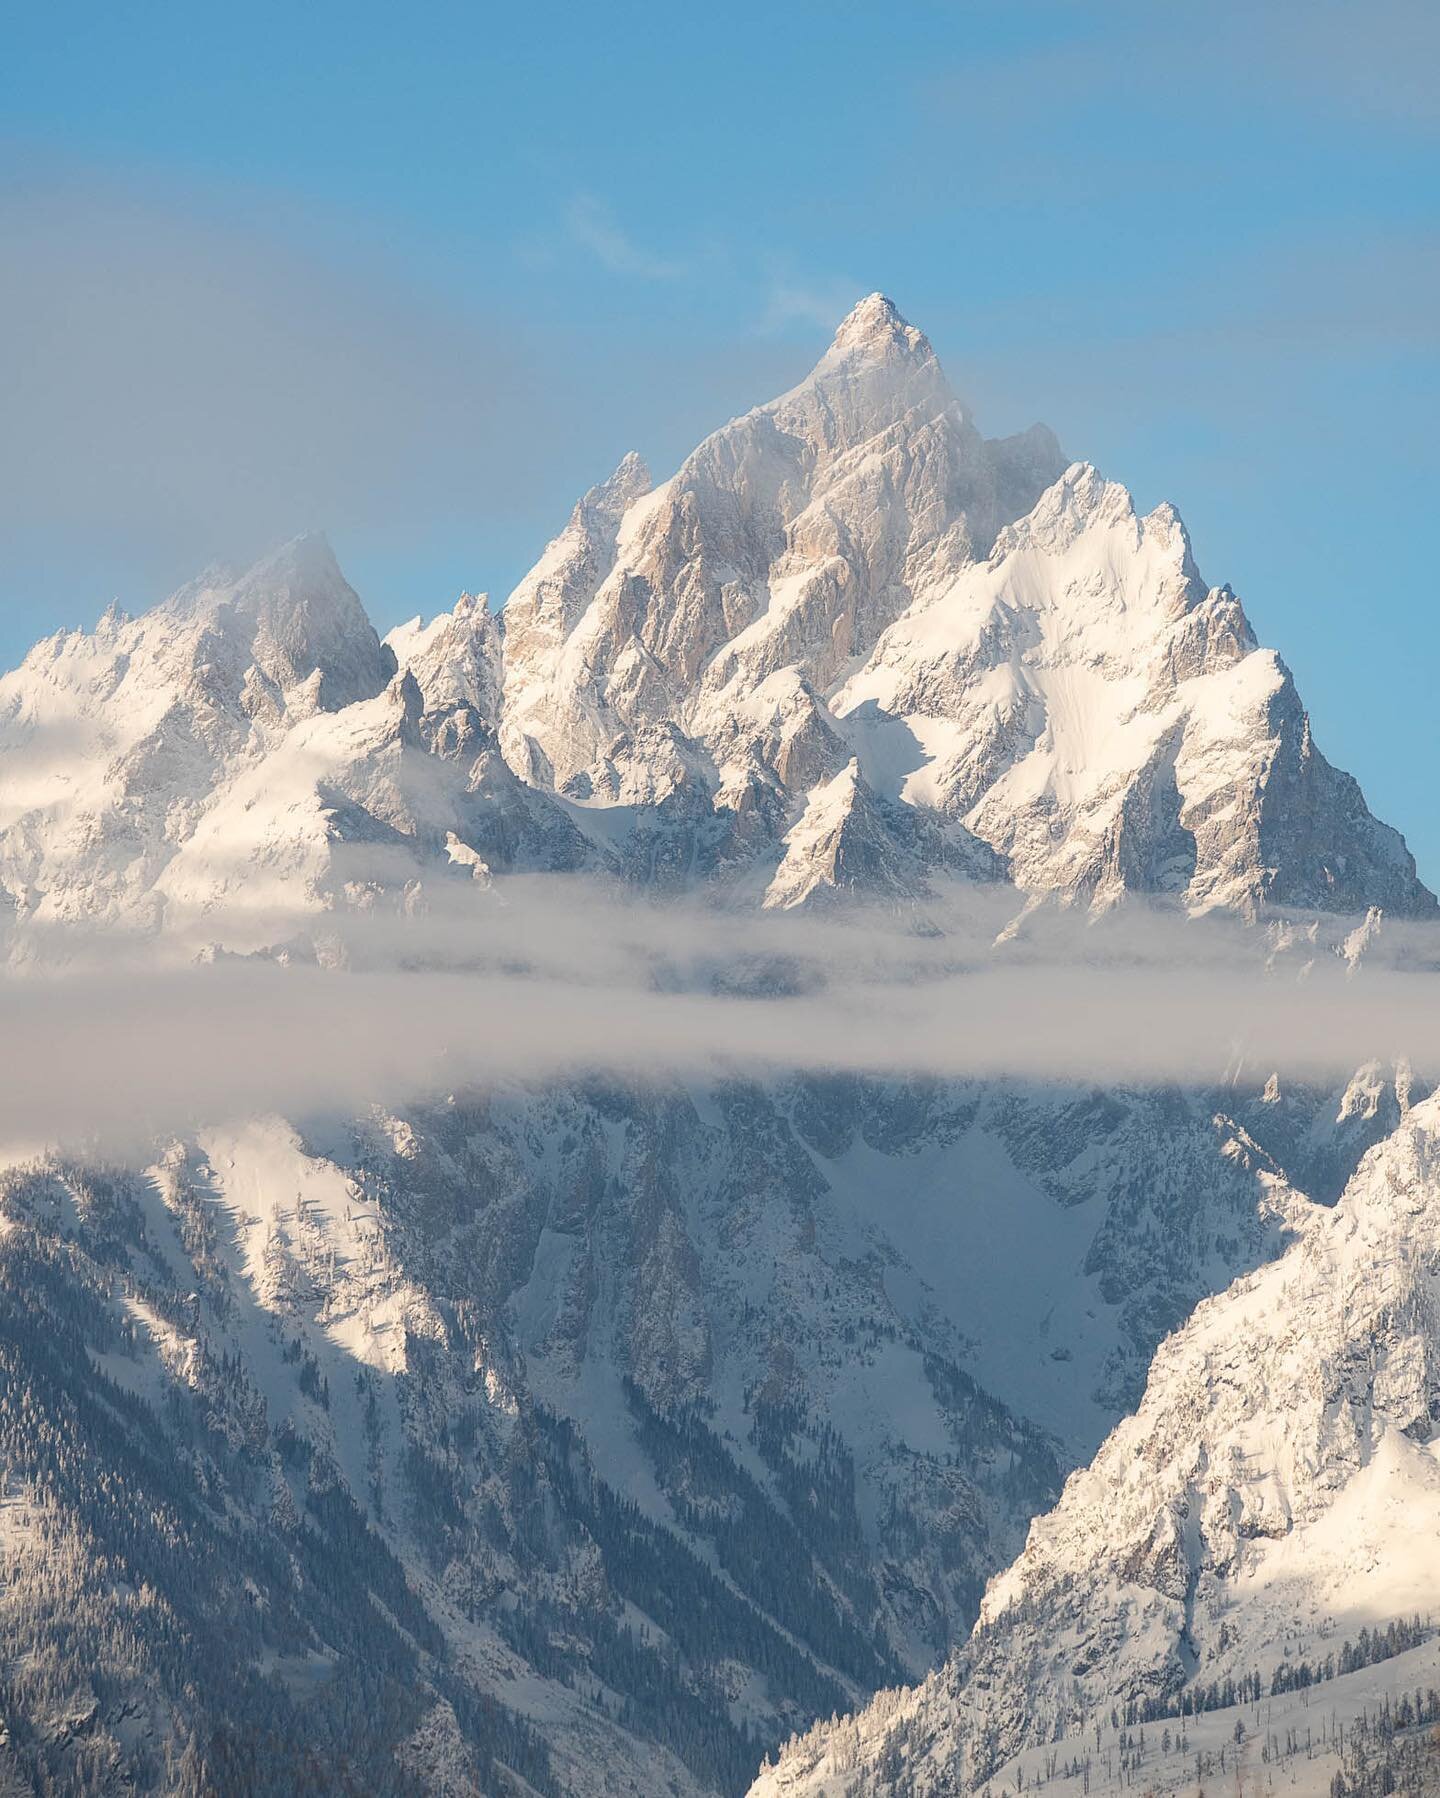 The first Capture Magic Retreat of 2023 will be January 25-29th in the Tetons! The beauty of the Tetons in the winter will take your breath away 💙 
.
Photographed with the @sigmaphoto 150-600mm Contemporary Lens at 320mm 
.
#magicinthetetons #womenc